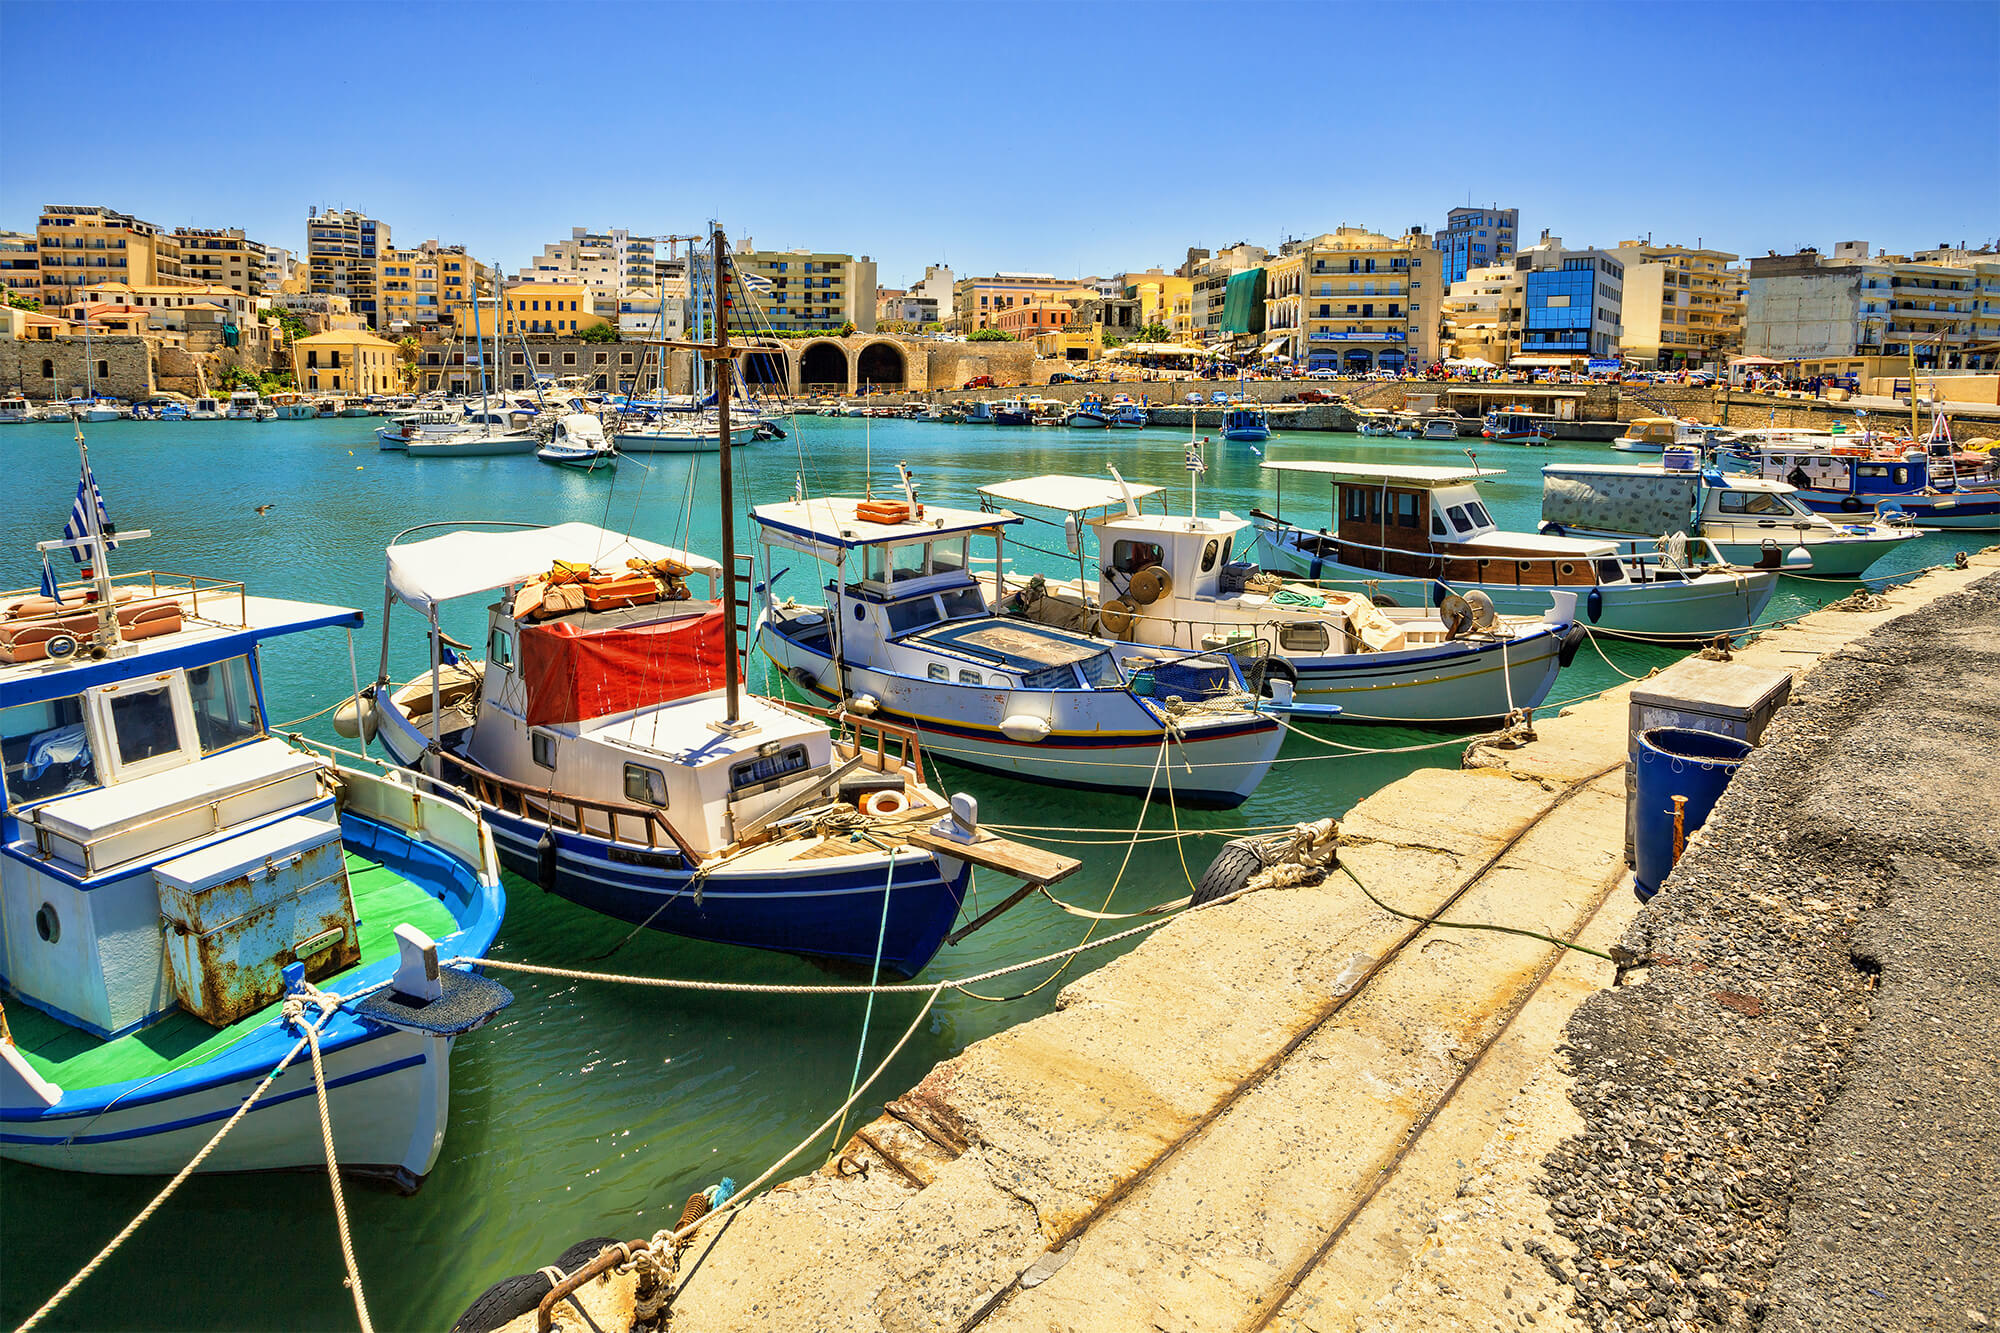 Photo of boats in a dock on the island of Crete.